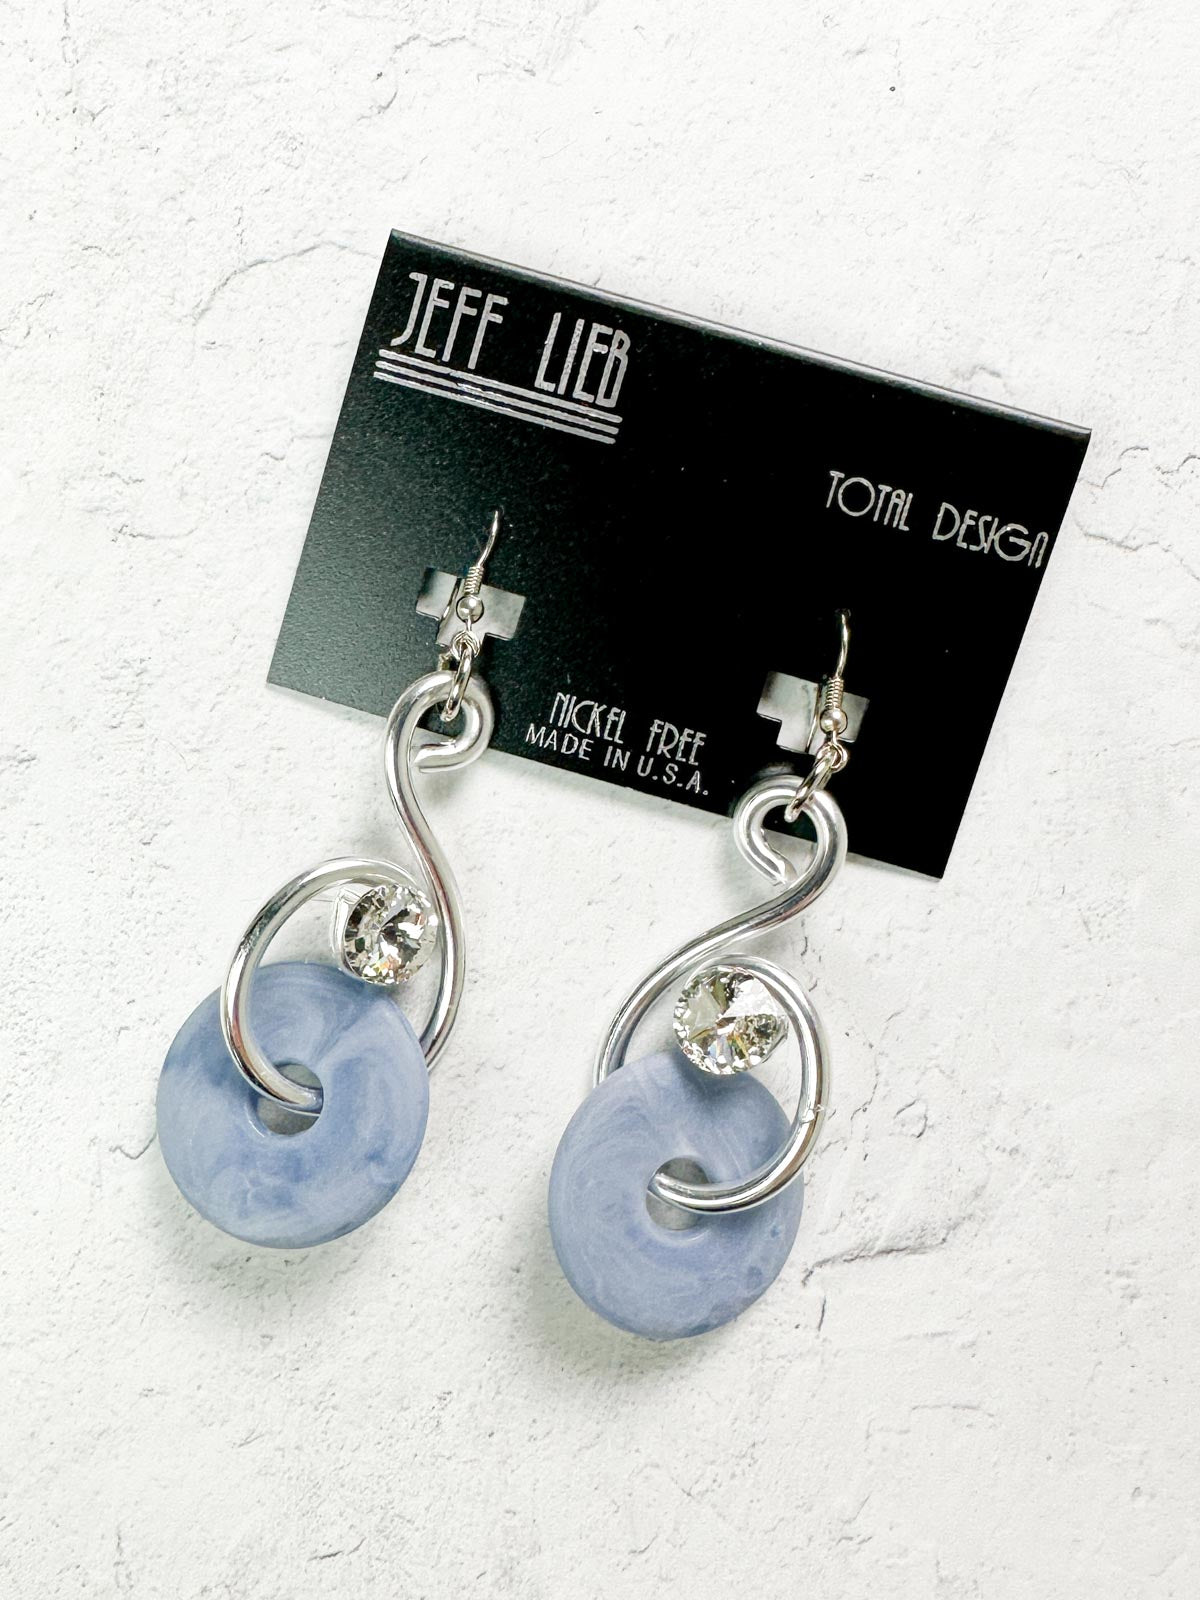 Jeff Lieb Total Design Jewelry Wire Swirl Resin Accent Drop Earrings, Blue - Statement Boutique